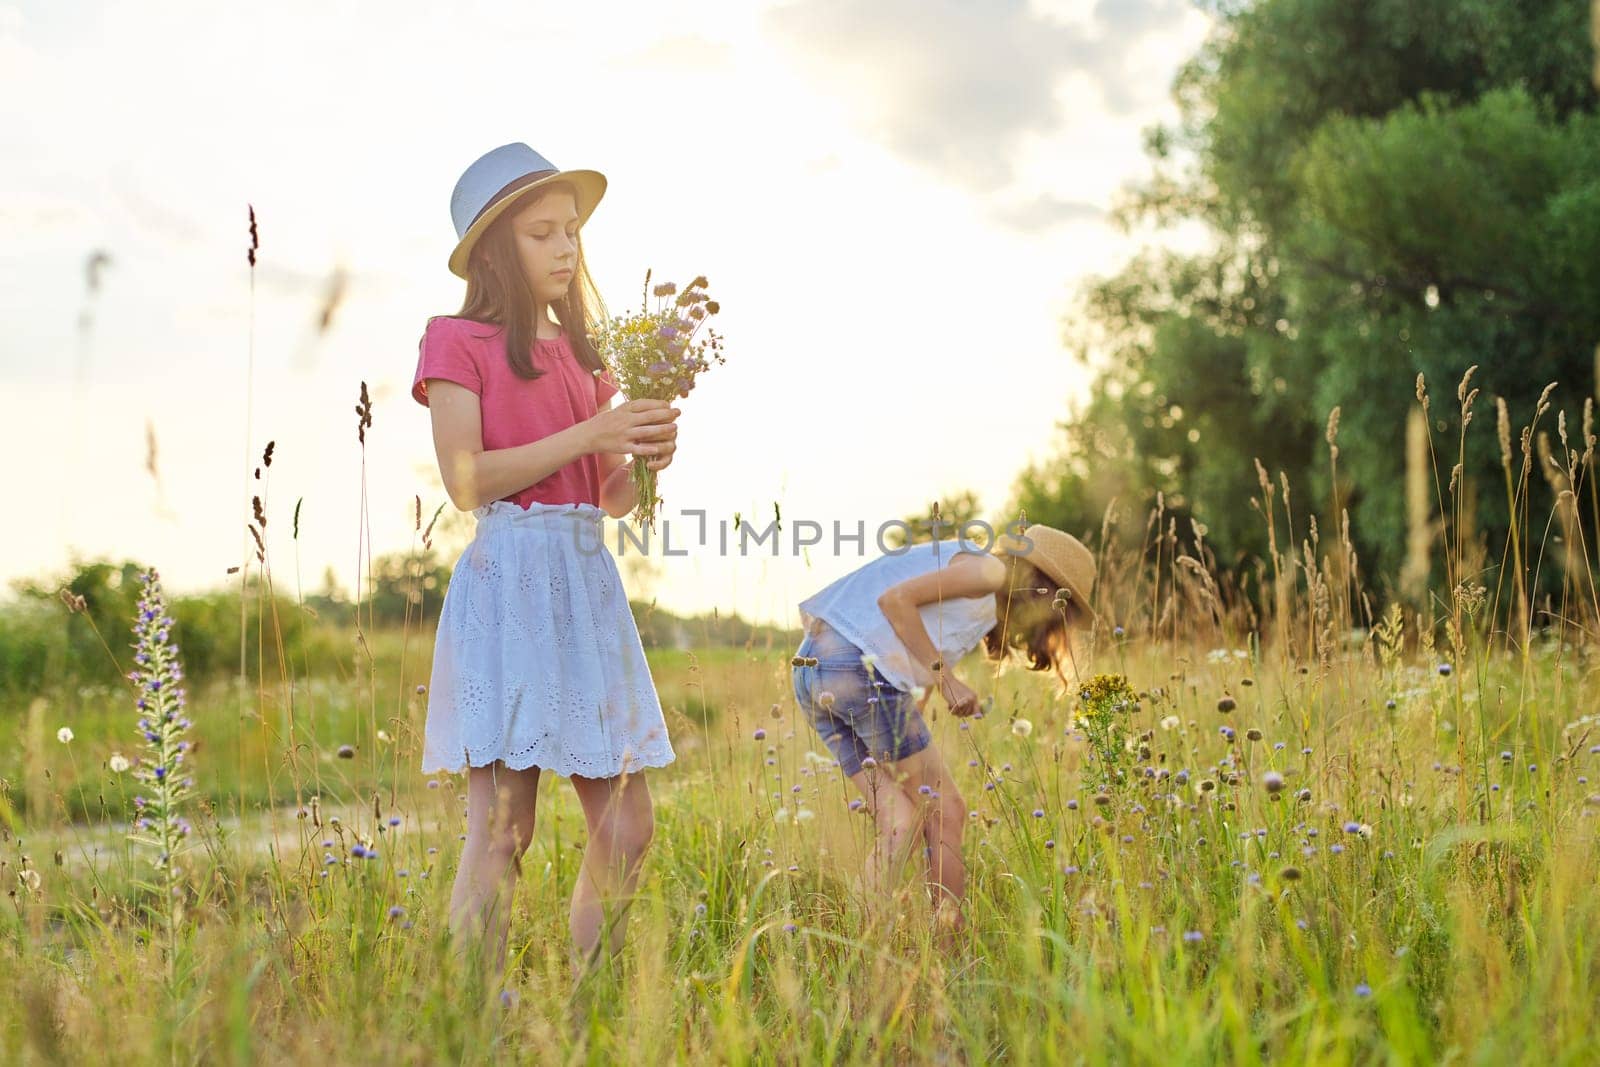 Two pretty girls children walking in a sunny meadow picking wildflowers in a bouquet. Summer holidays, nature, happy childhood, friendship concept